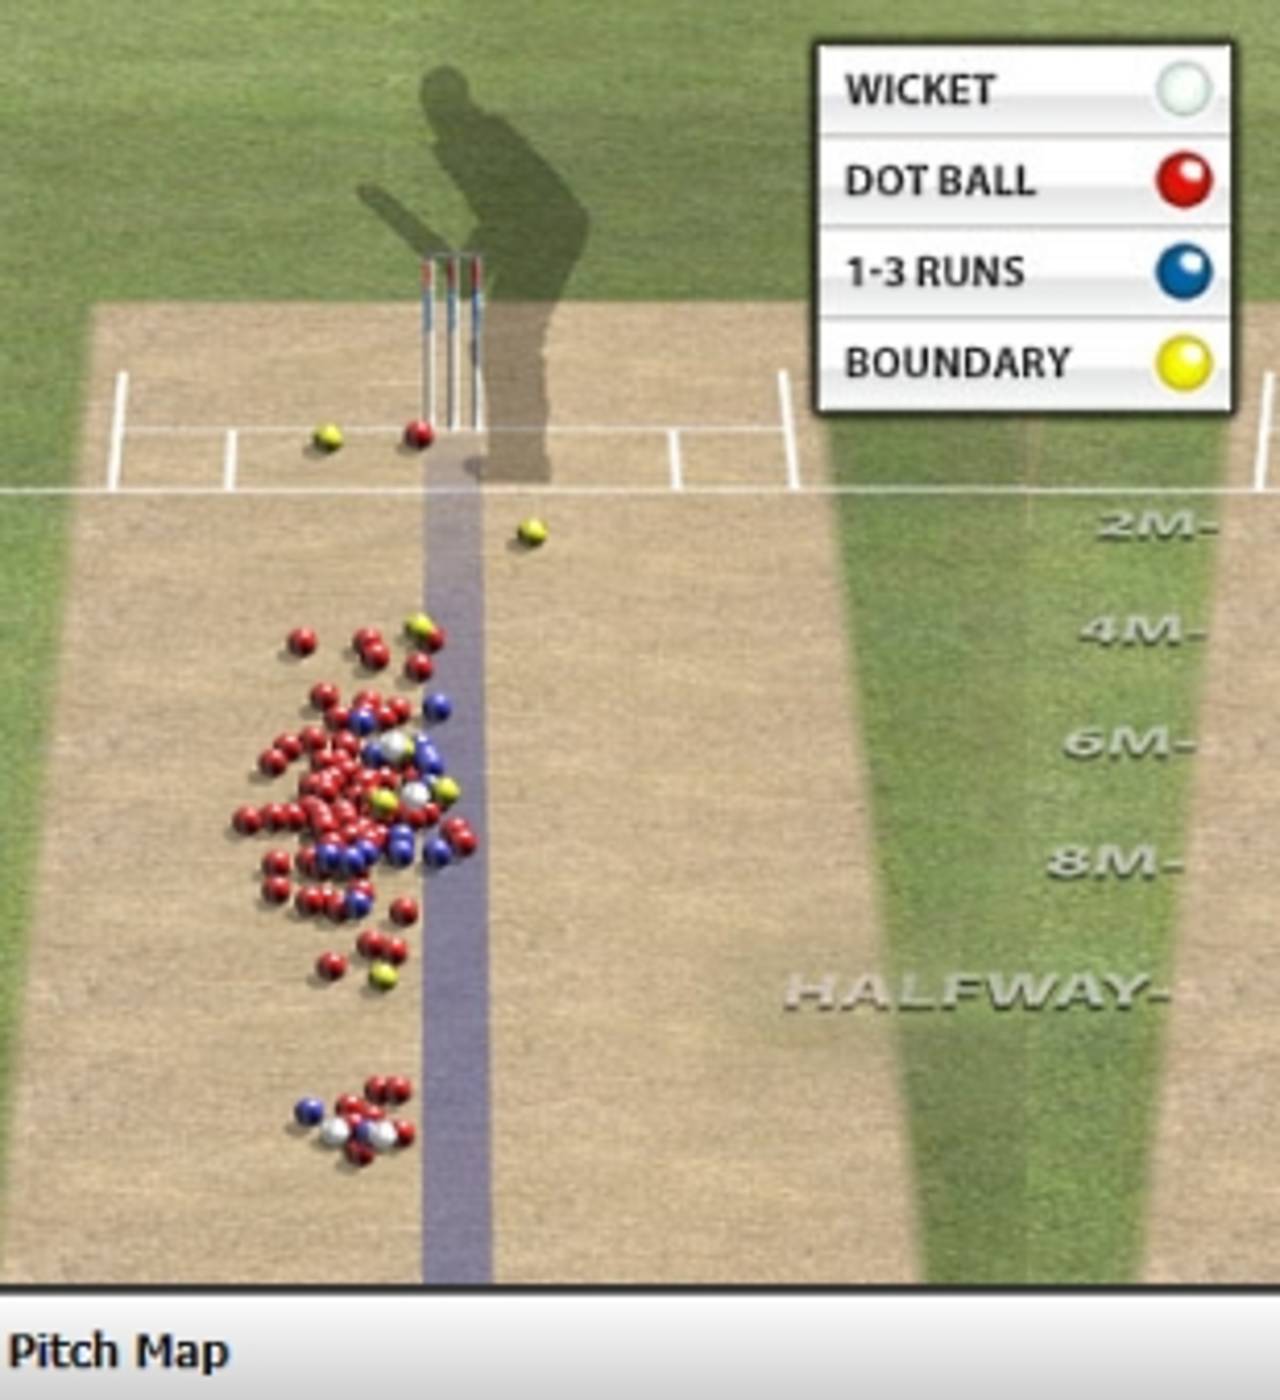 Tim Southee's lengths to righthanders. Enlarge the image for the full pitch map&nbsp;&nbsp;&bull;&nbsp;&nbsp;Hawk-Eye